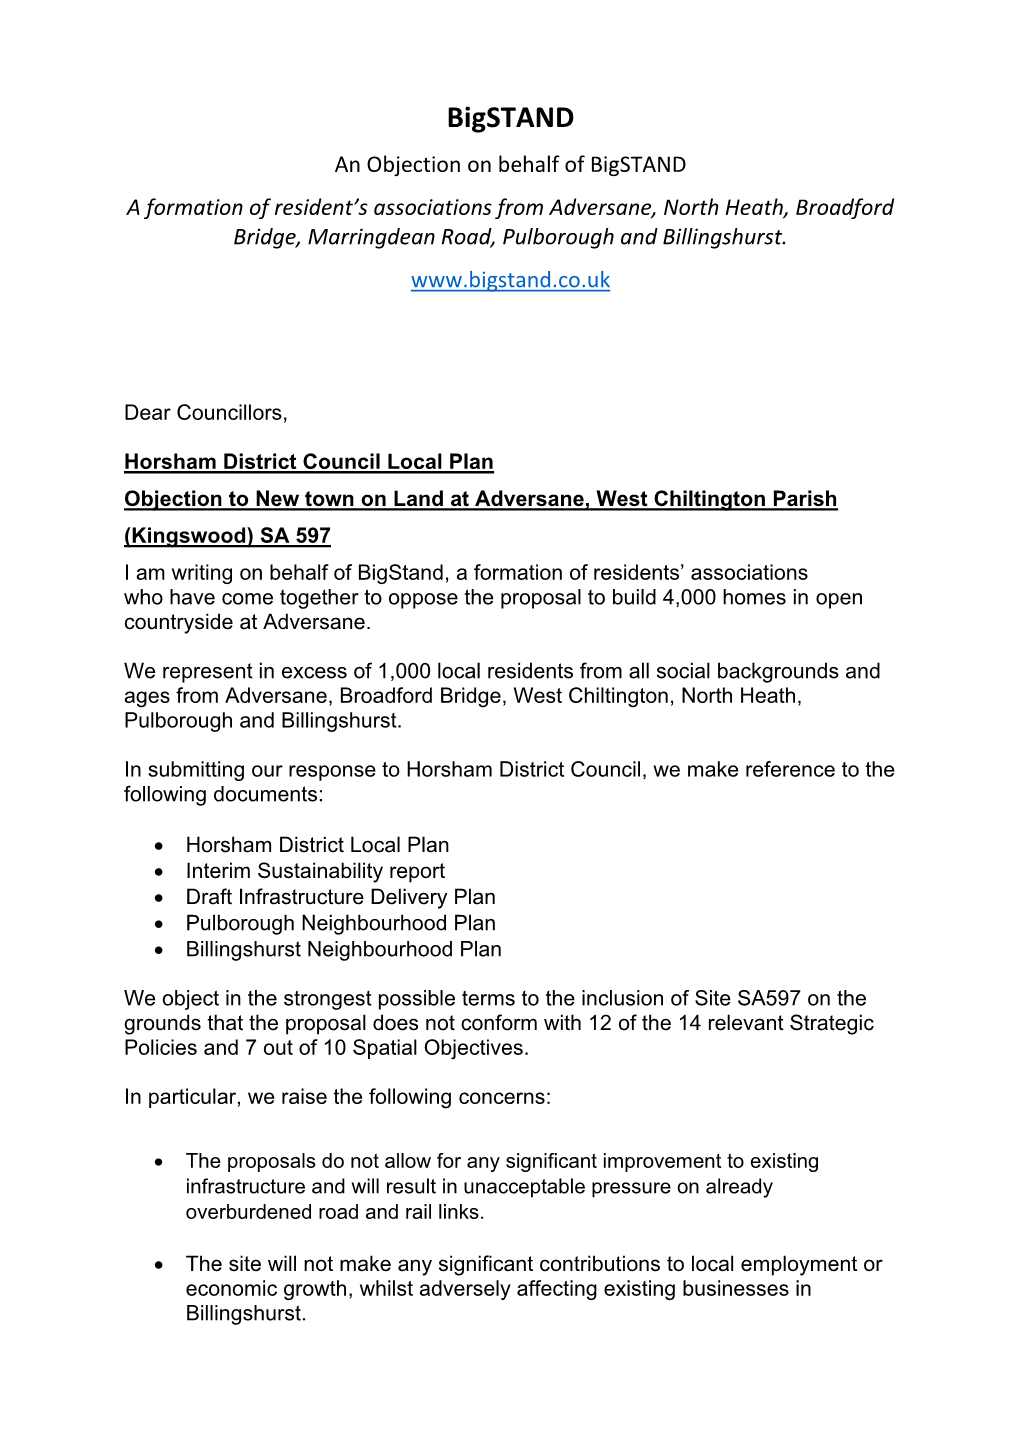 Click the Image to View Our Objection to the Local Plan, Submitted By